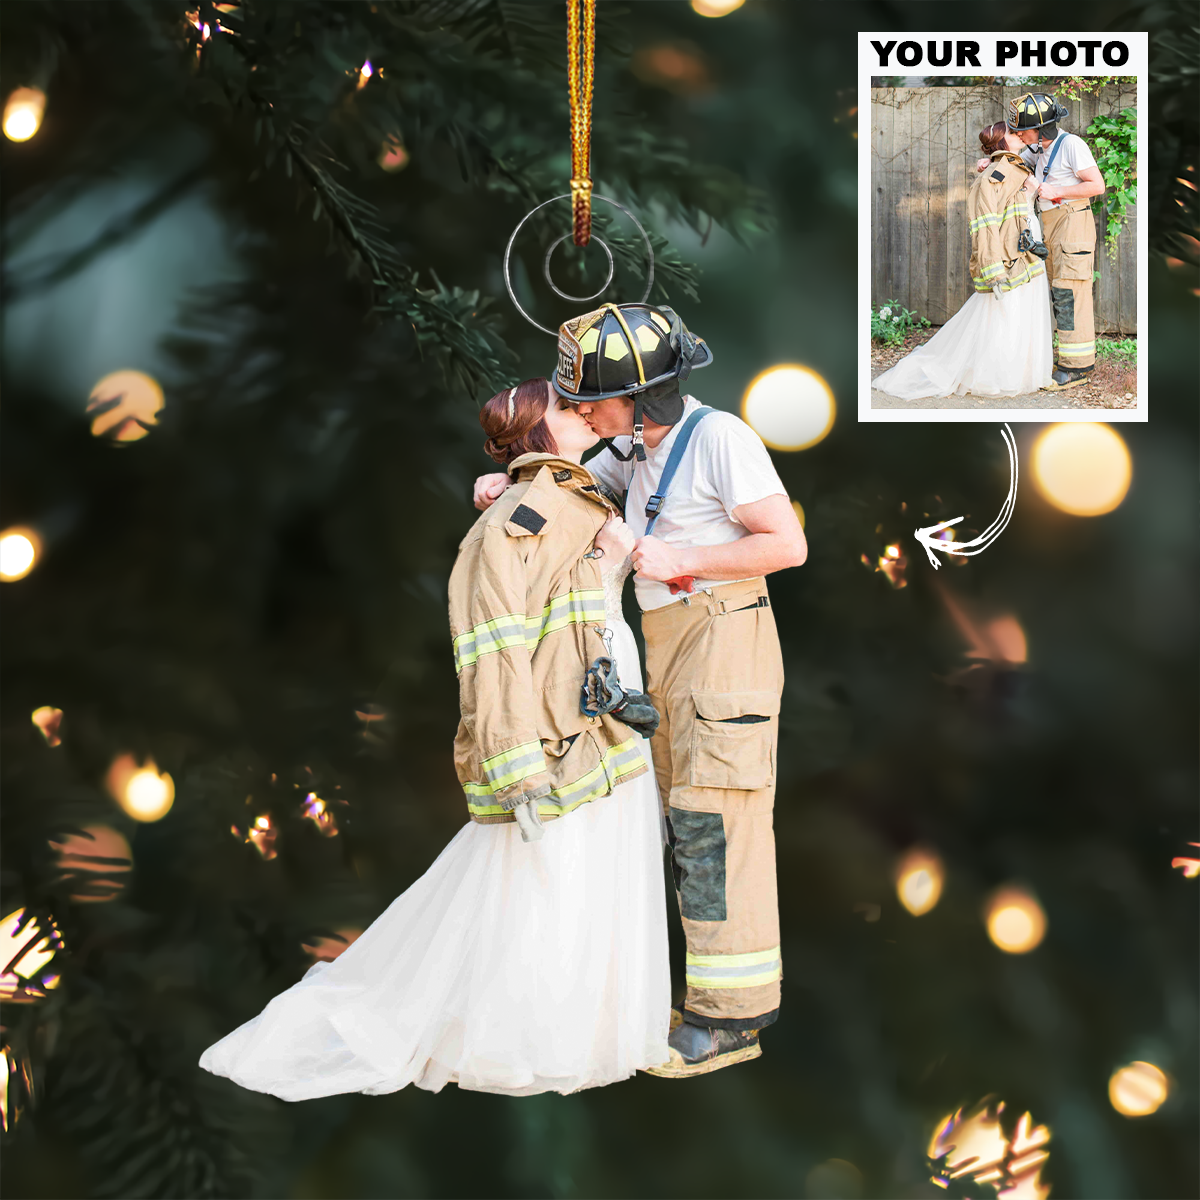 Firefighter Couple - Personalized Custom Photo Mica Ornament - Christmas Gift For Couple, Firefighter, Fireman, Firewoman, Family, Family Members